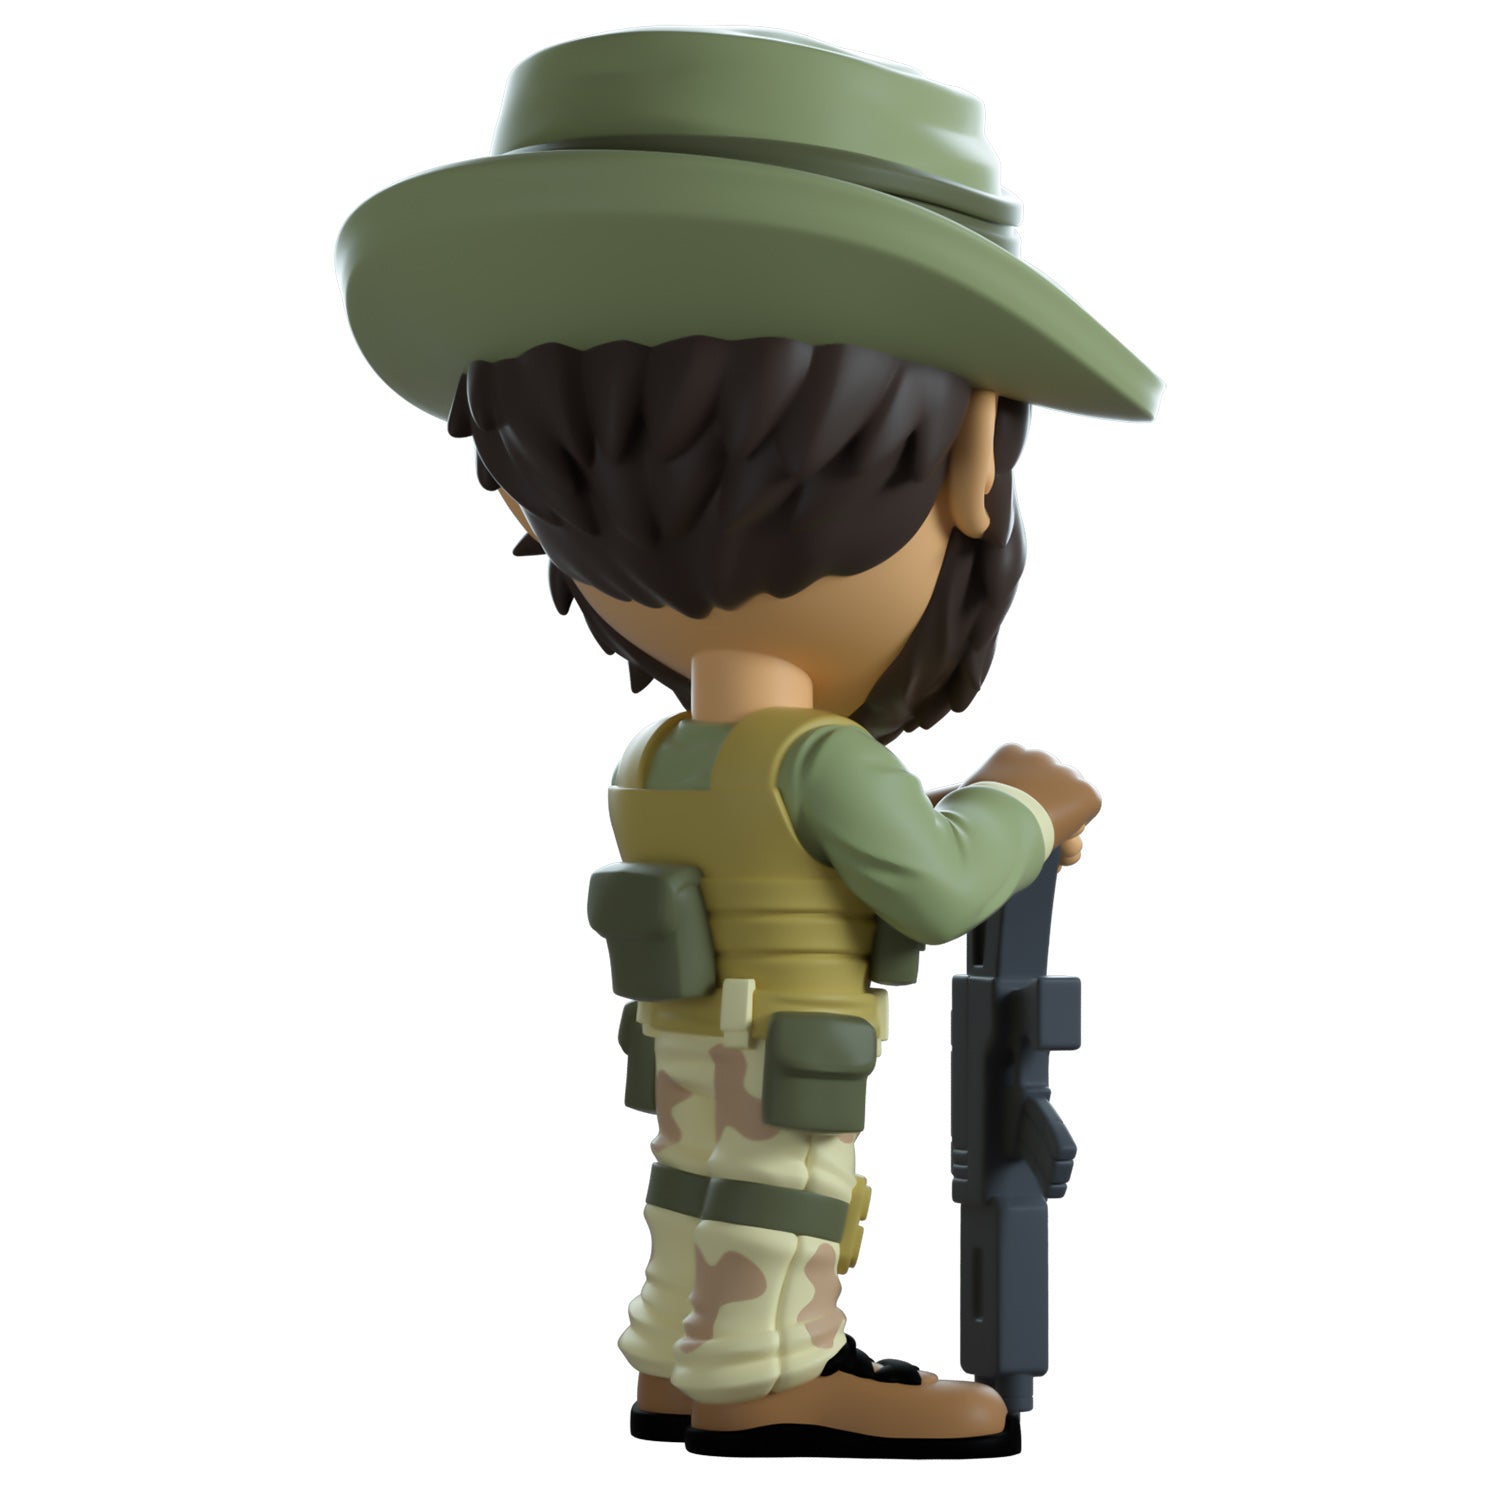 Call of Duty Captain Price Youtooz Figurine - Back Side View